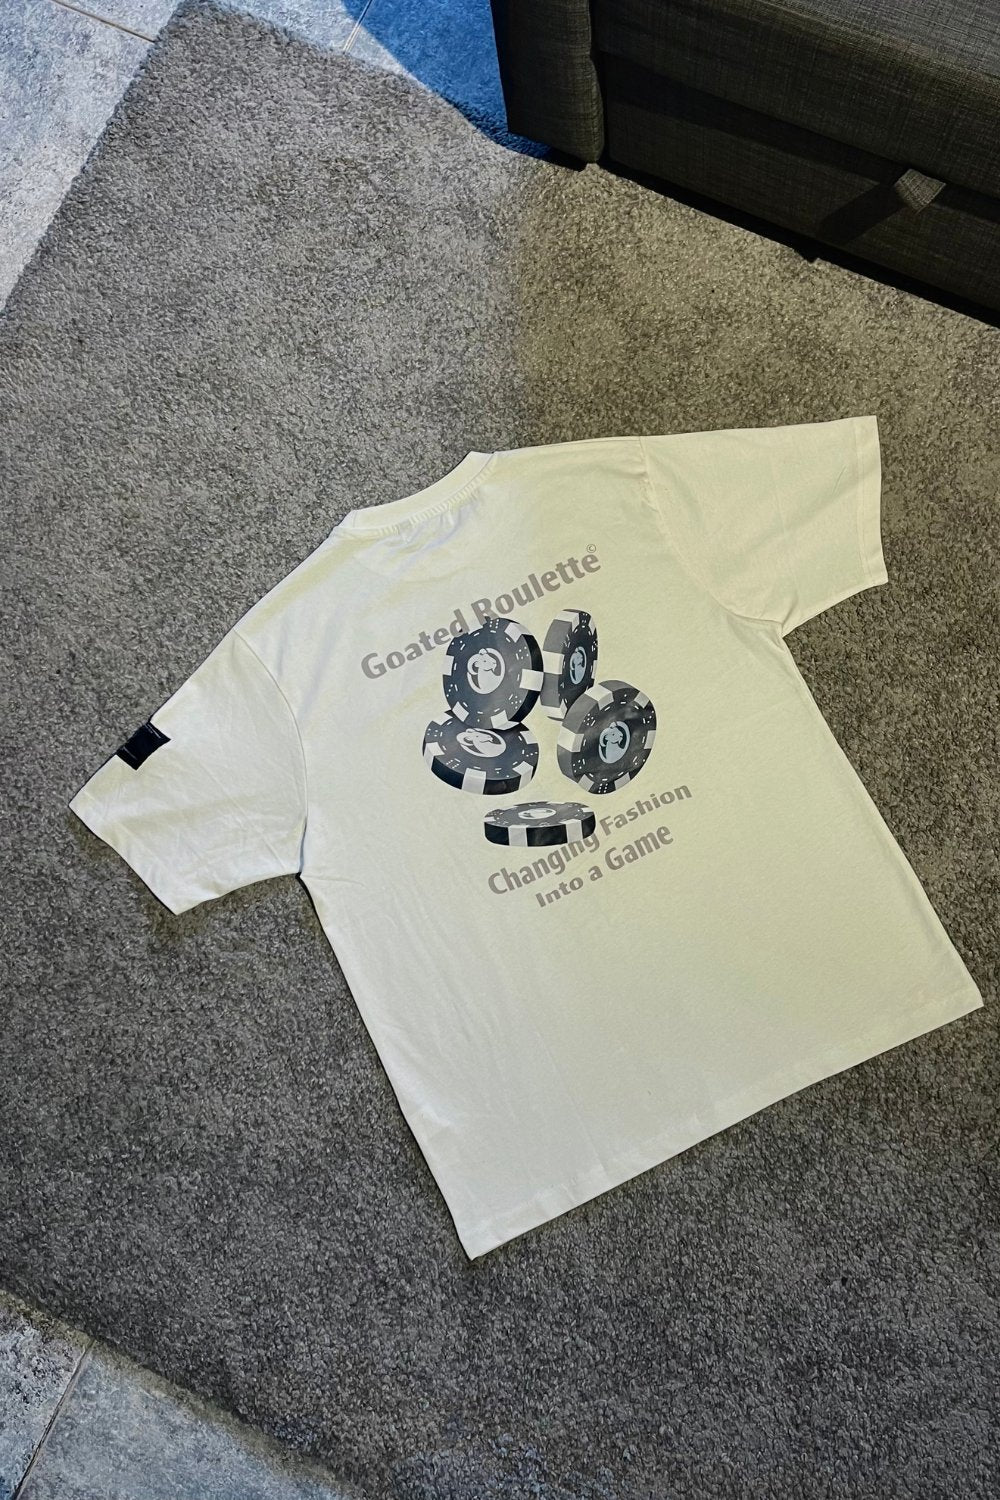 Goated Roulette Tee - Coconut Milk - 2401SS11NF017100S